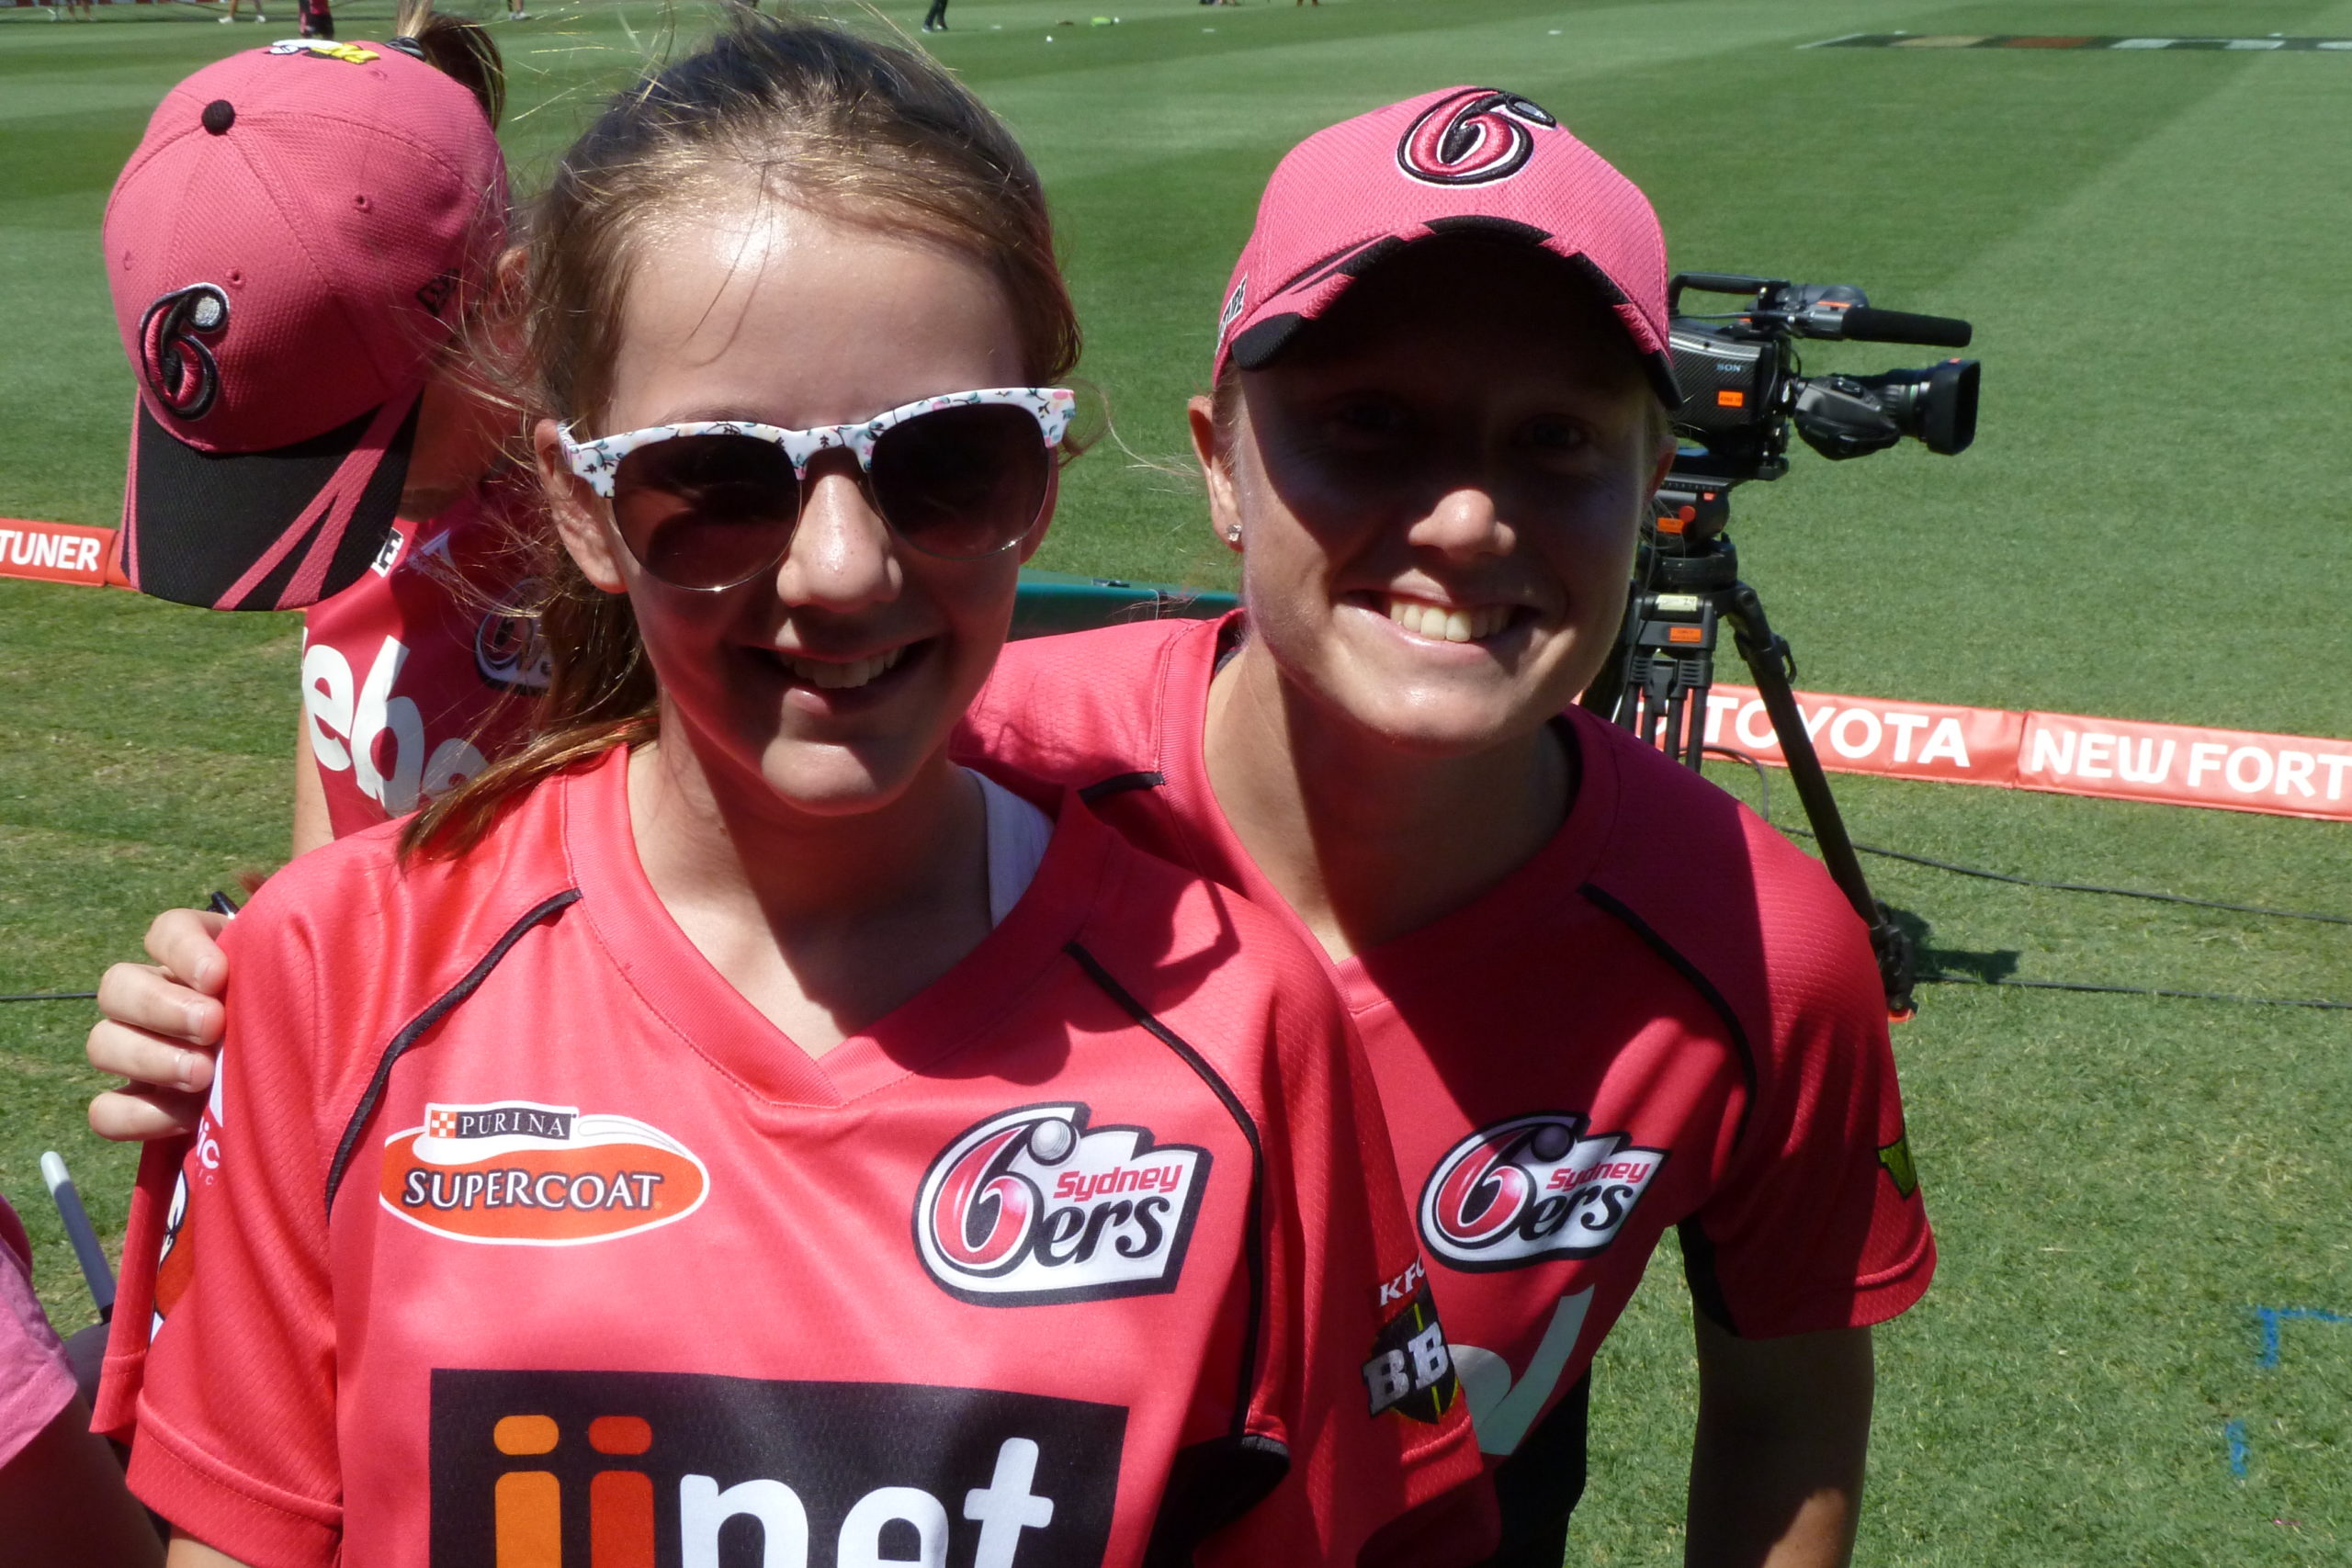 Danielle Chivers (Girls Under 12 White) with Alyssa Healey at the SCG during a Sixers game - 2 January 2016.